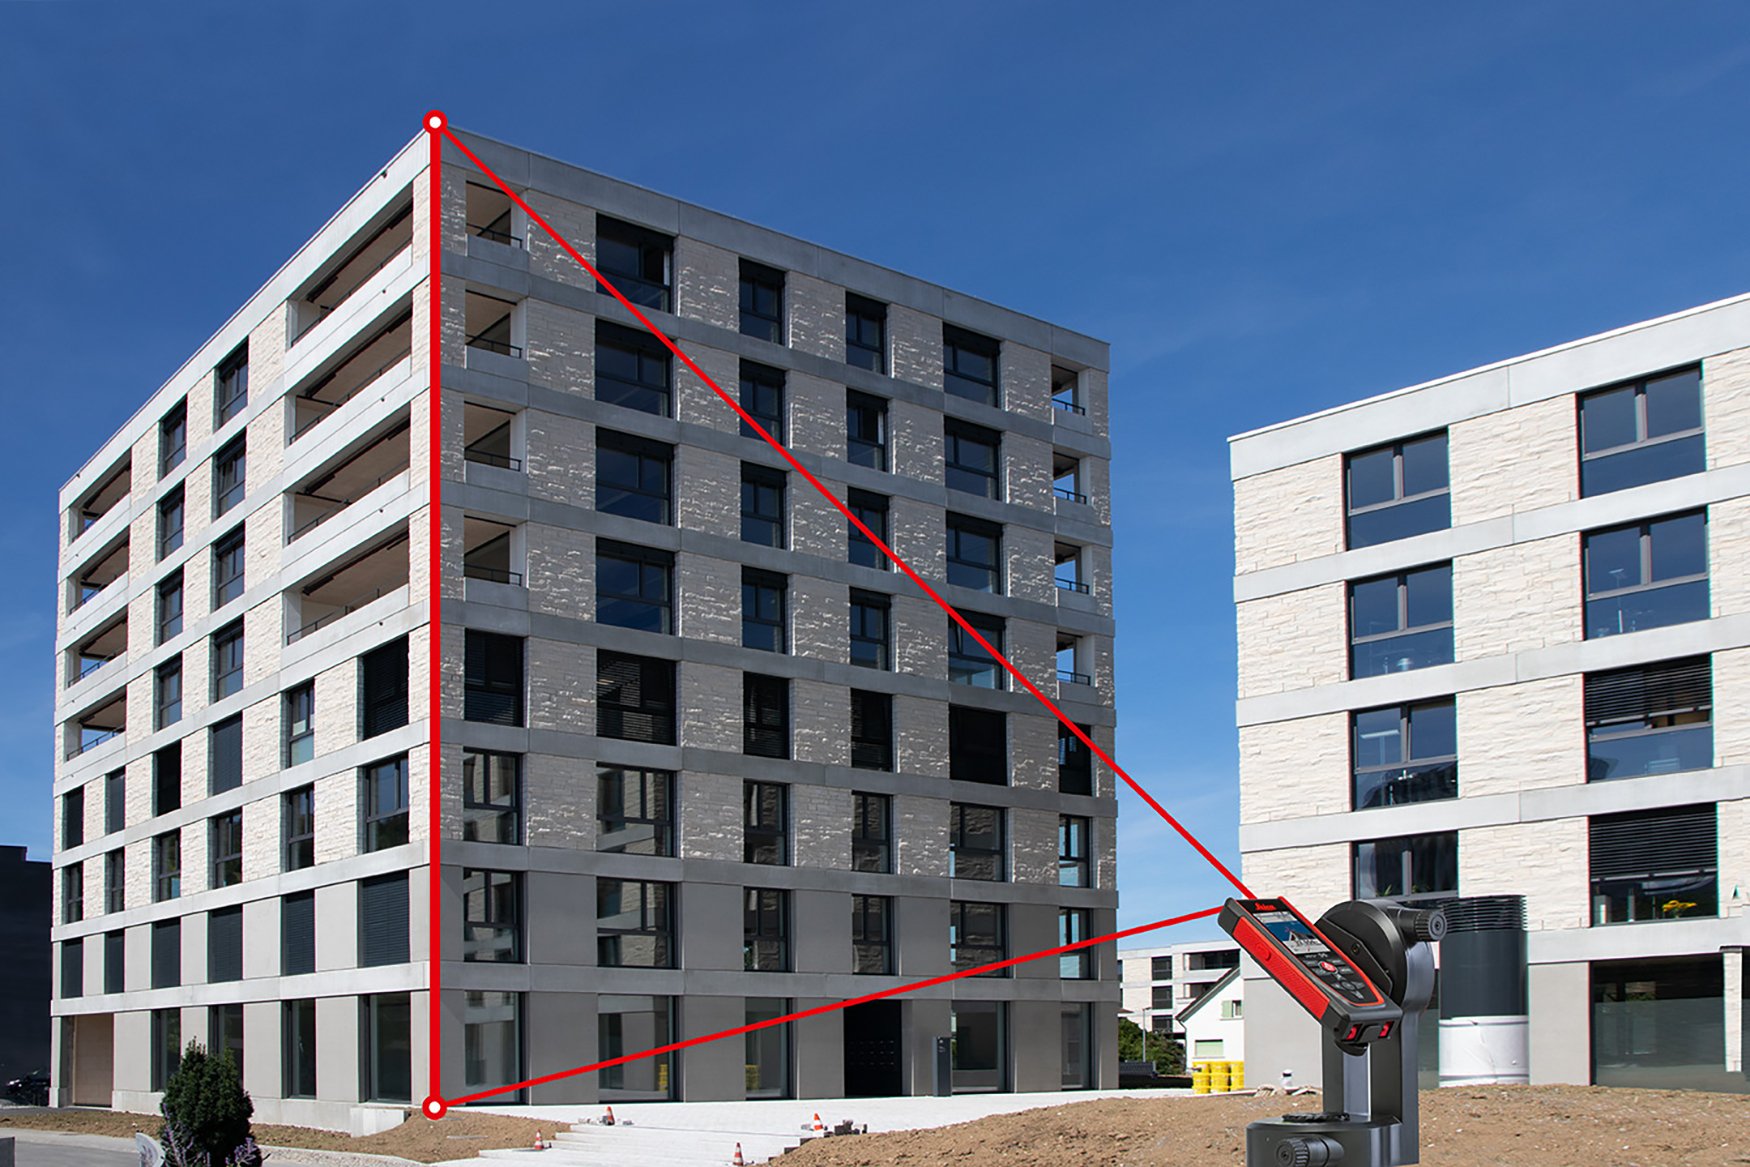 The height of an 8-storey building is measured with the Leica DISTO D5 laser measure on the FTA 360 tripod adapter.